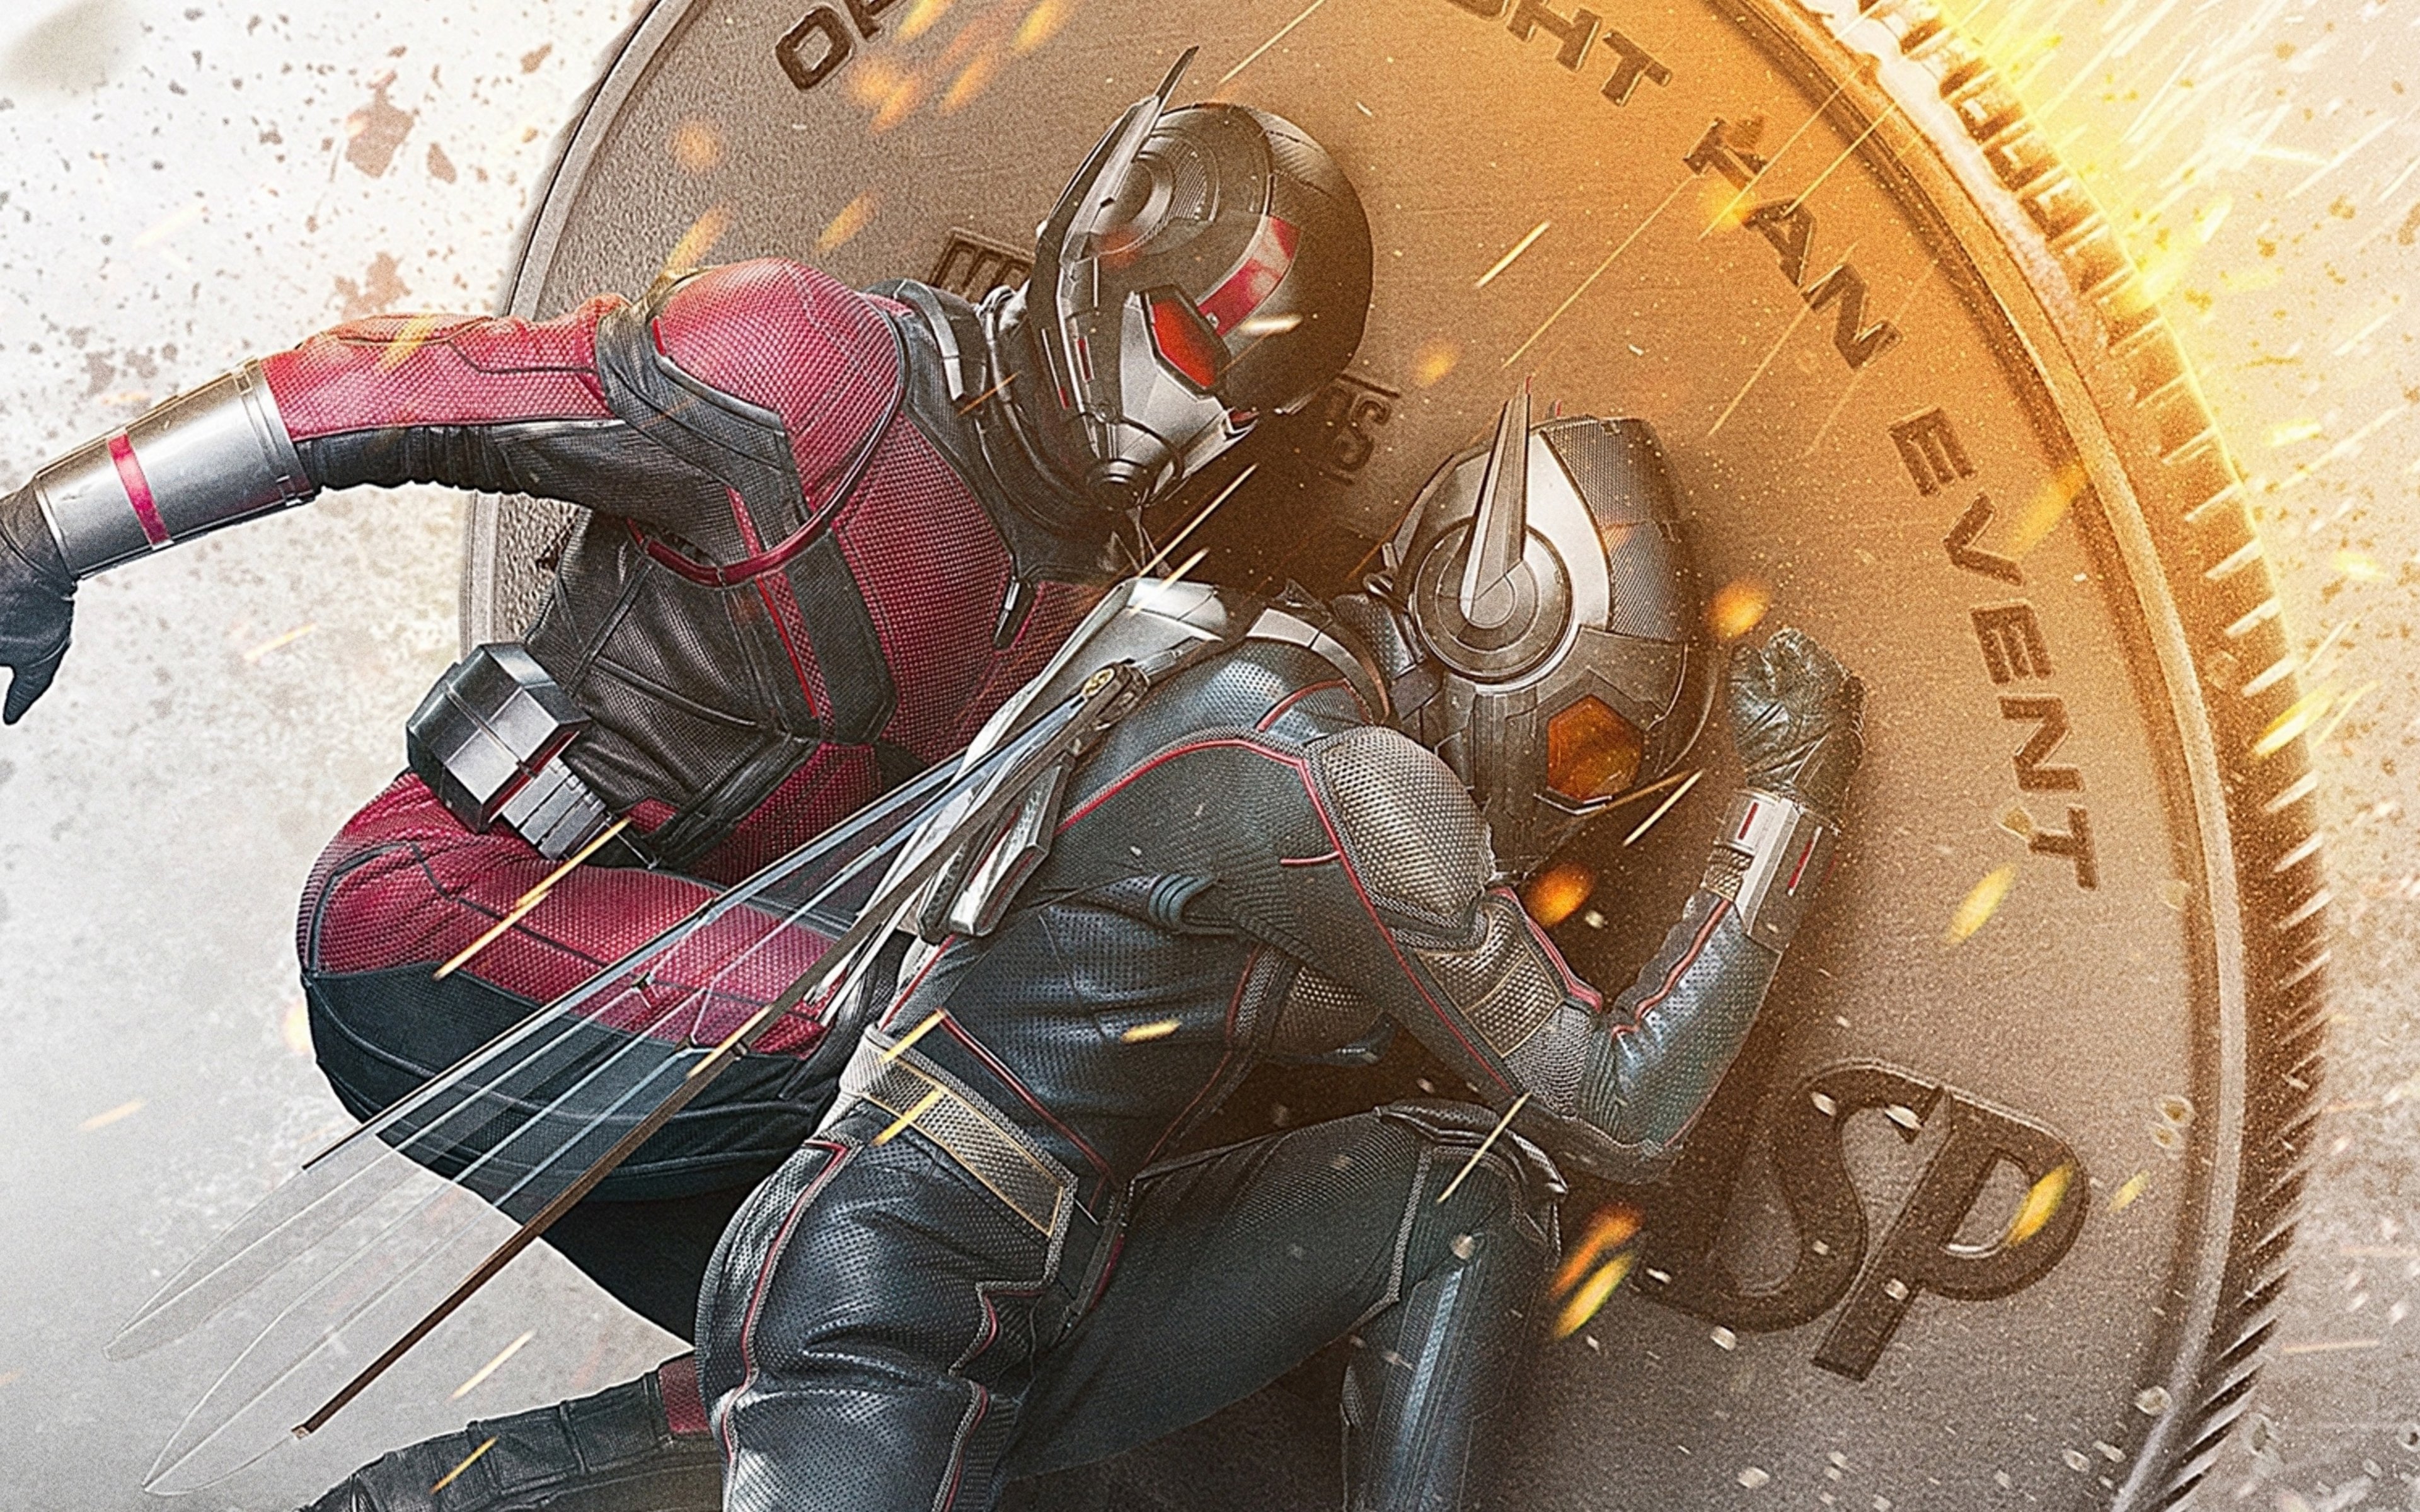 Ant Man and The Wasp Wallpaper 4k Ultra HD ID:4504